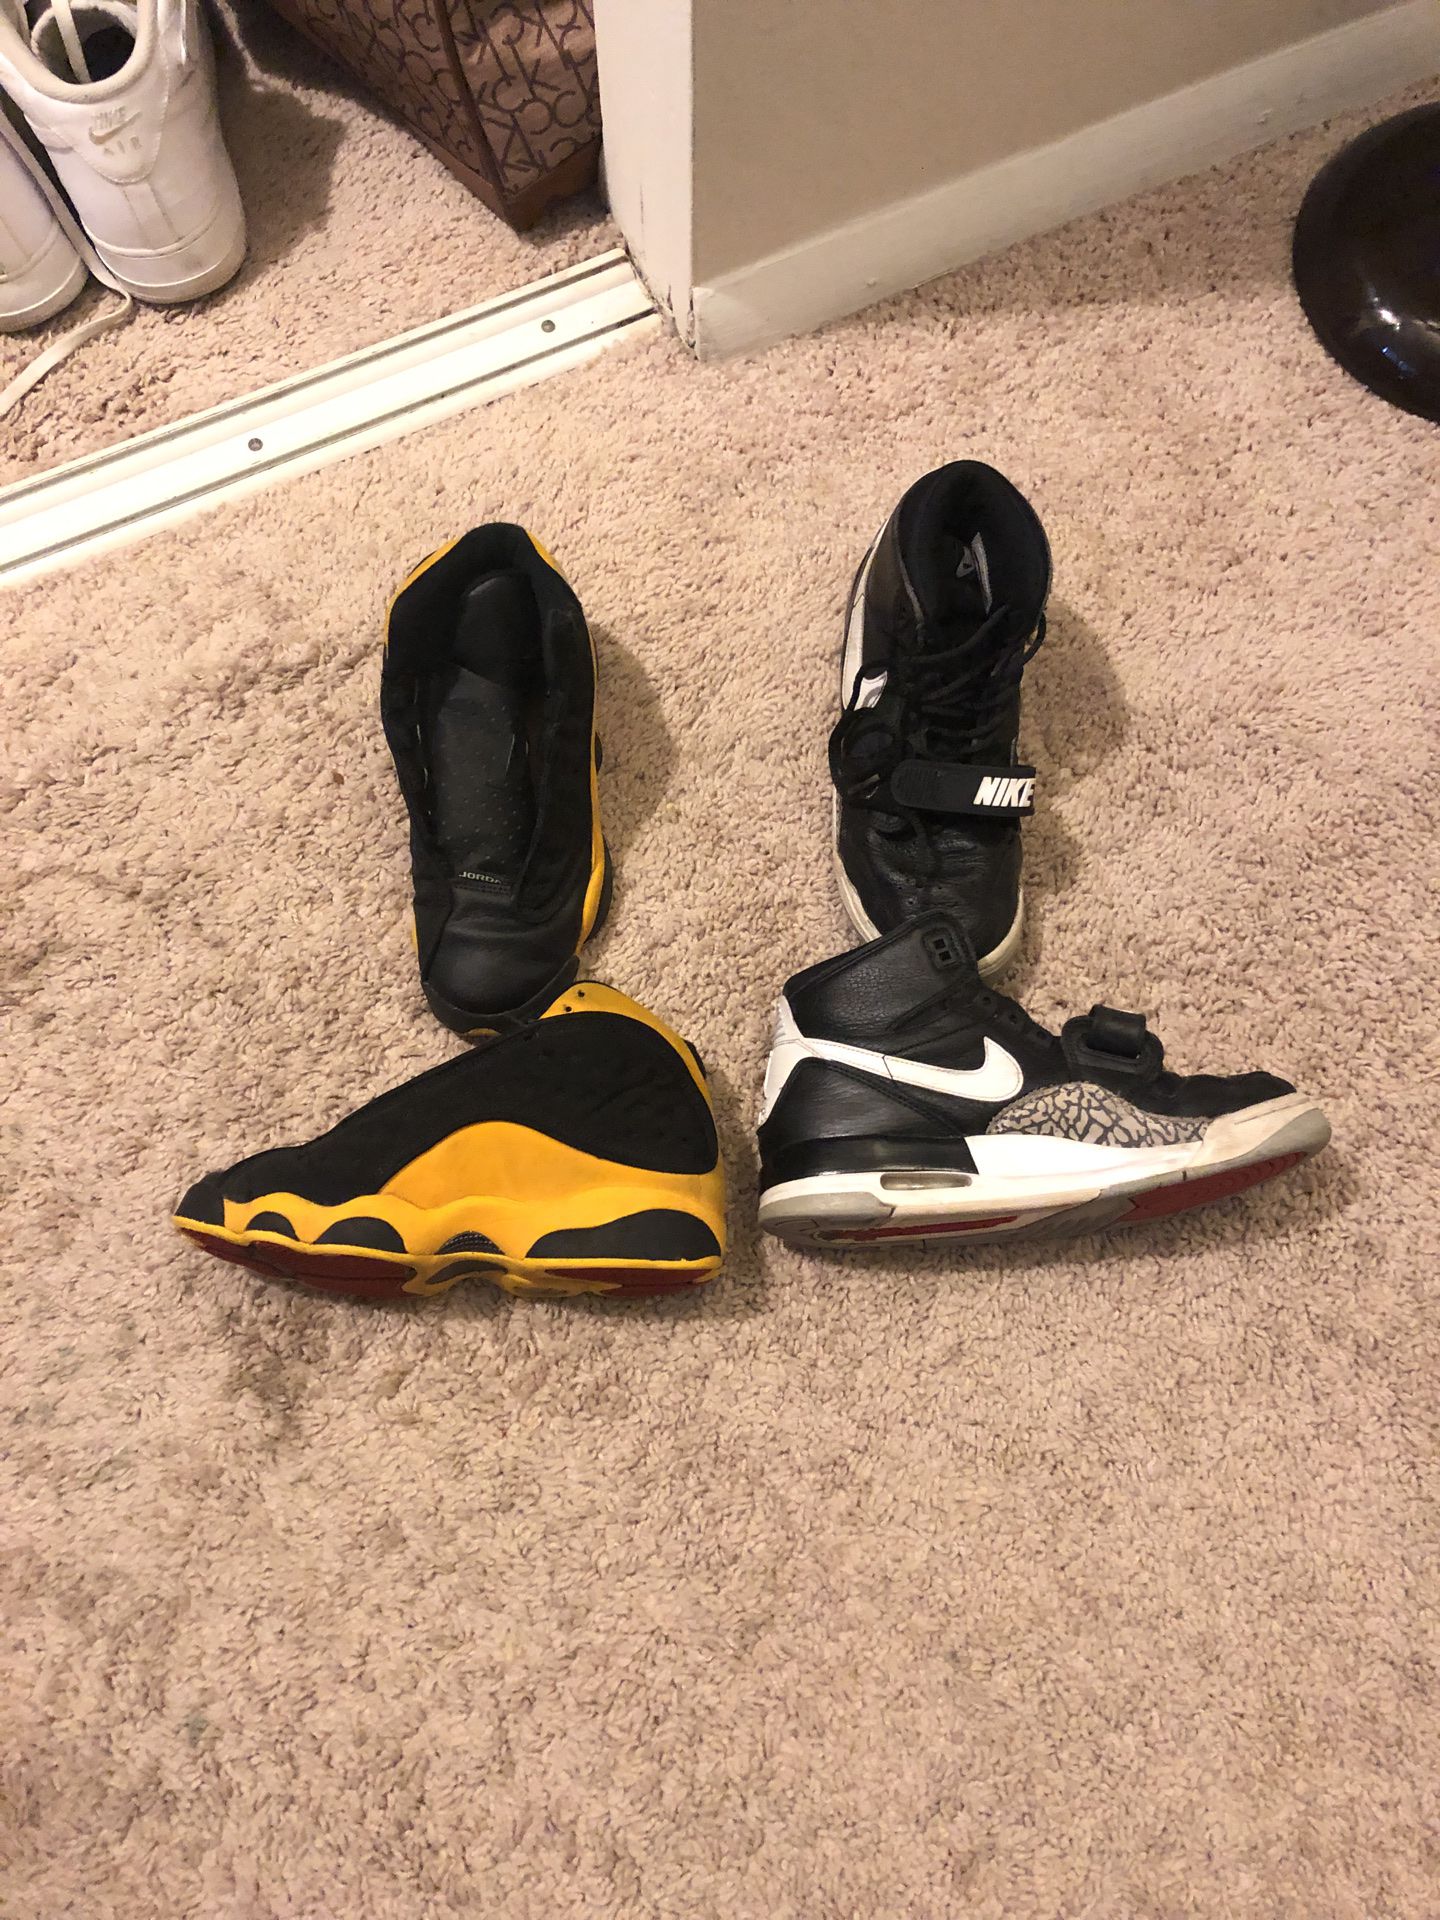 $20 Yellow shoes 4 size,, $20 Nike shoes 5 size..